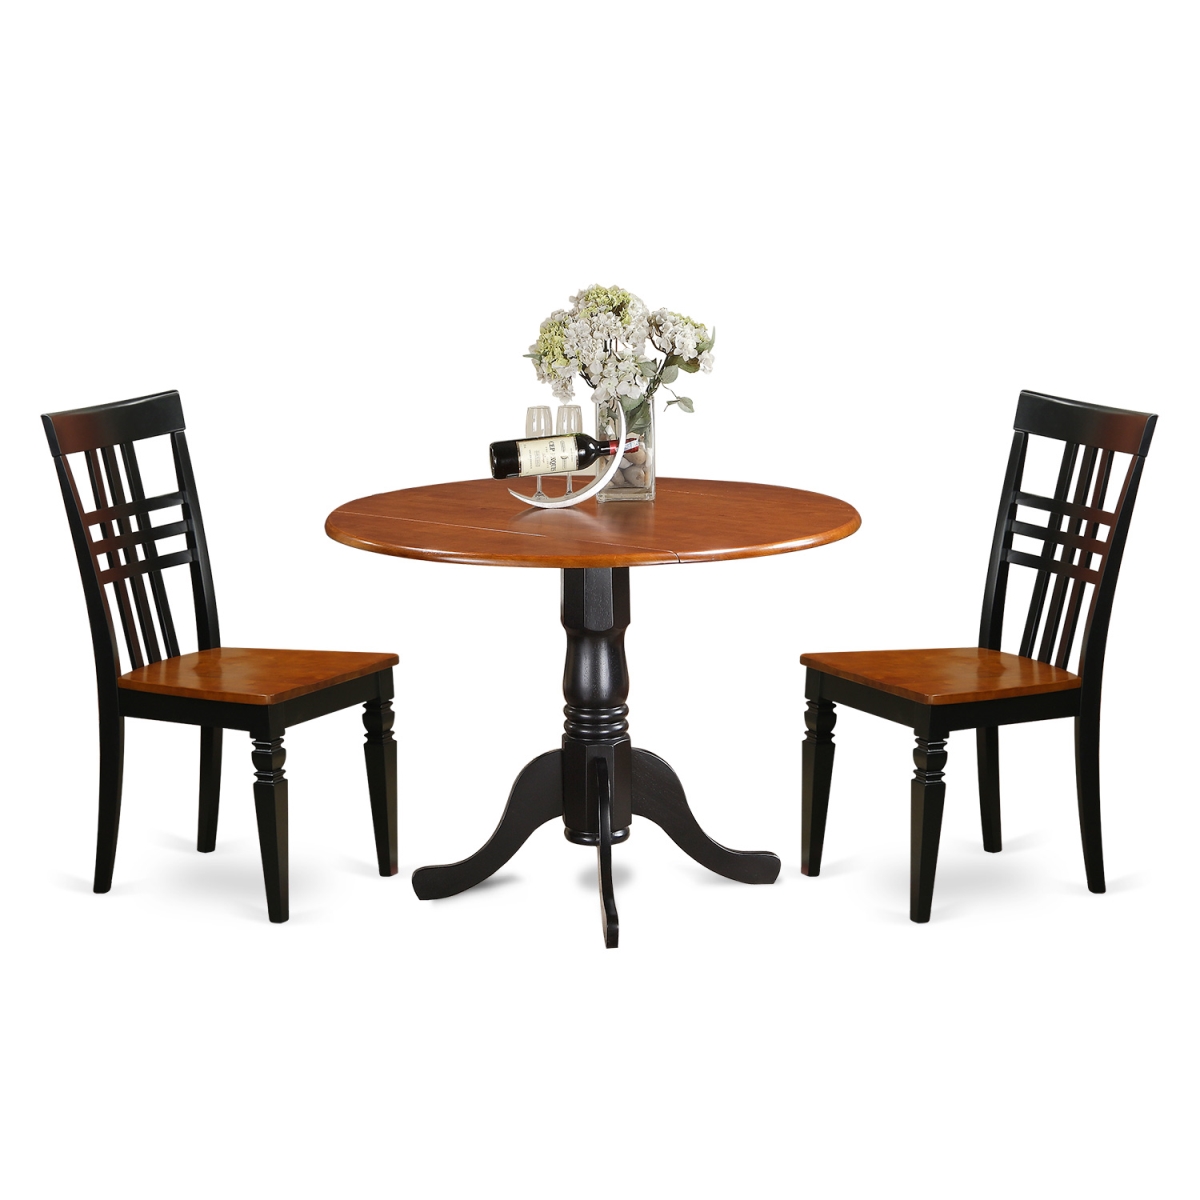 Picture of East West Furniture DLLG3-BCH-W Dining Room Table Set with One Dublin Dining Room Table & Two Chairs, Black & Cherry - 3 Piece